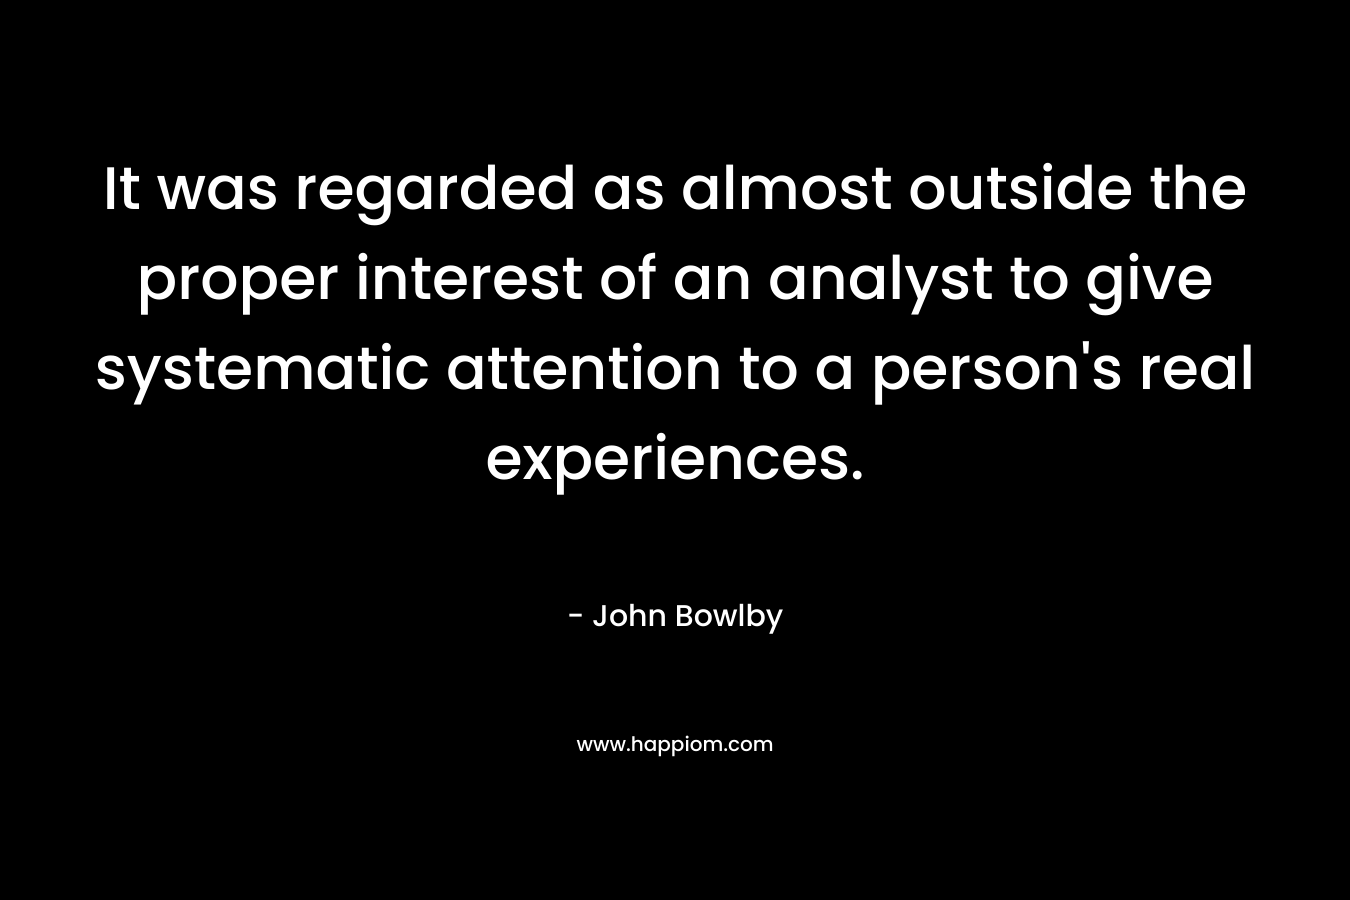 It was regarded as almost outside the proper interest of an analyst to give systematic attention to a person’s real experiences. – John Bowlby